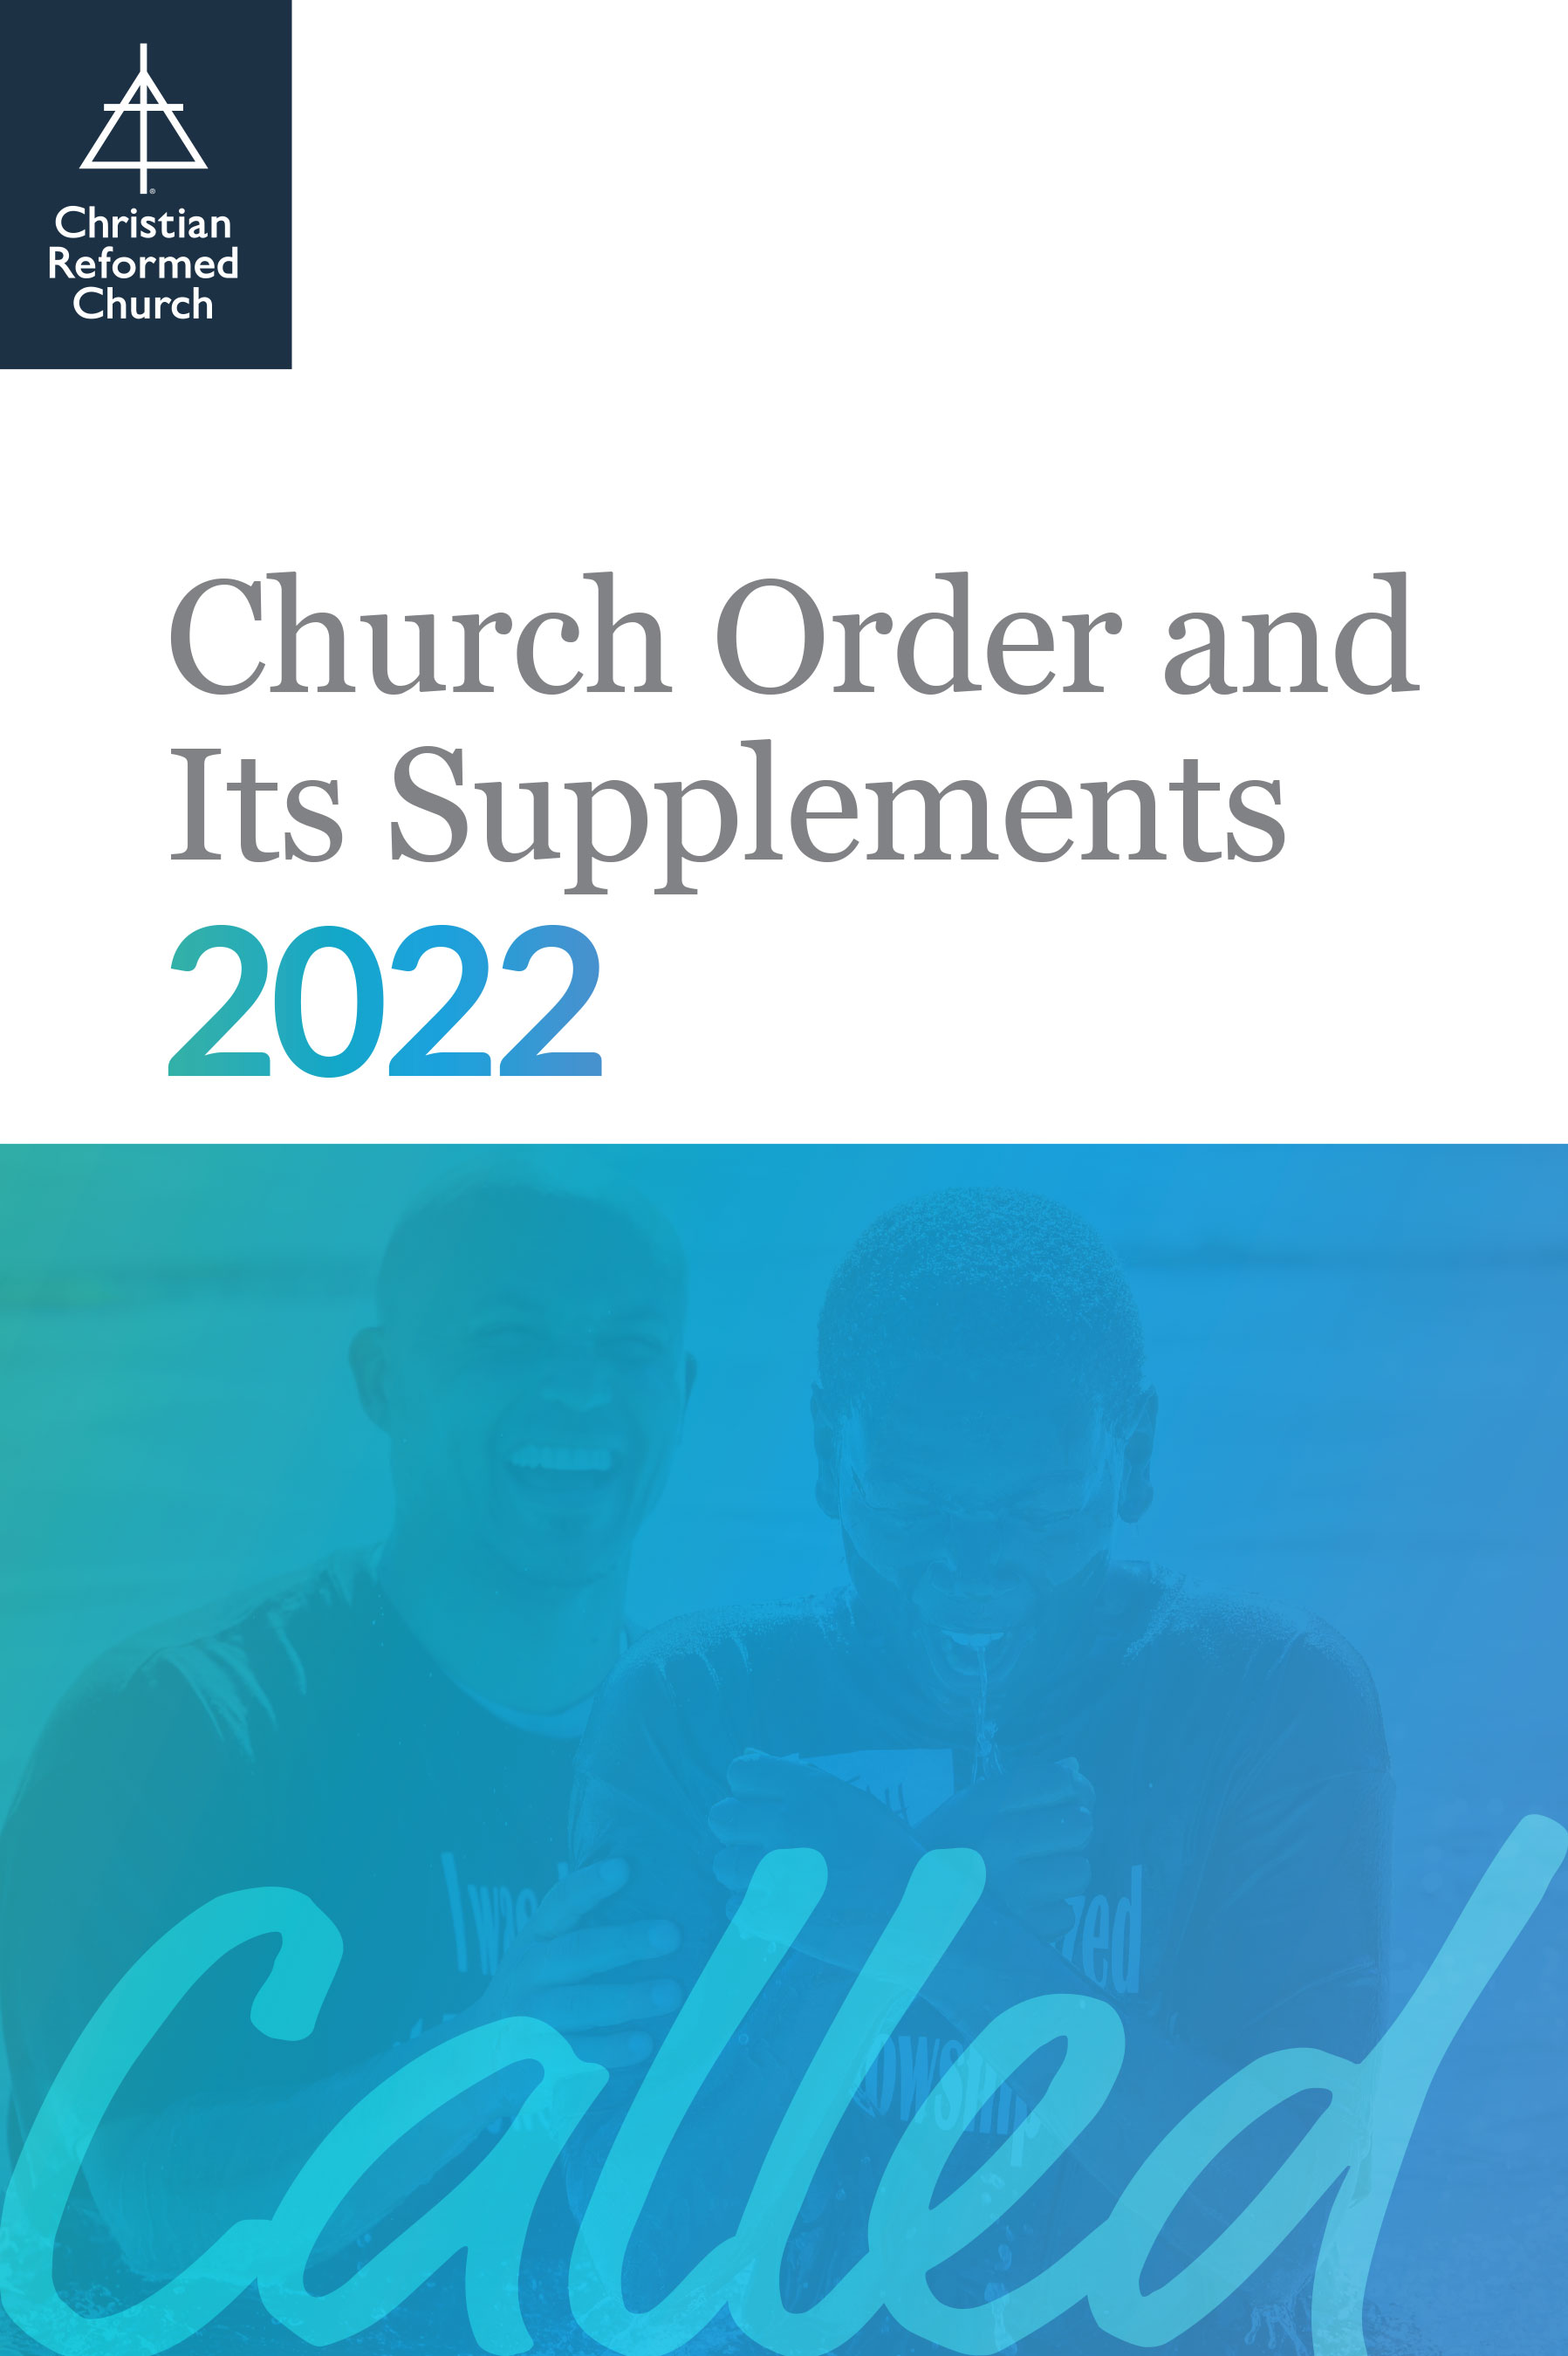 Church Order and Its Supplements